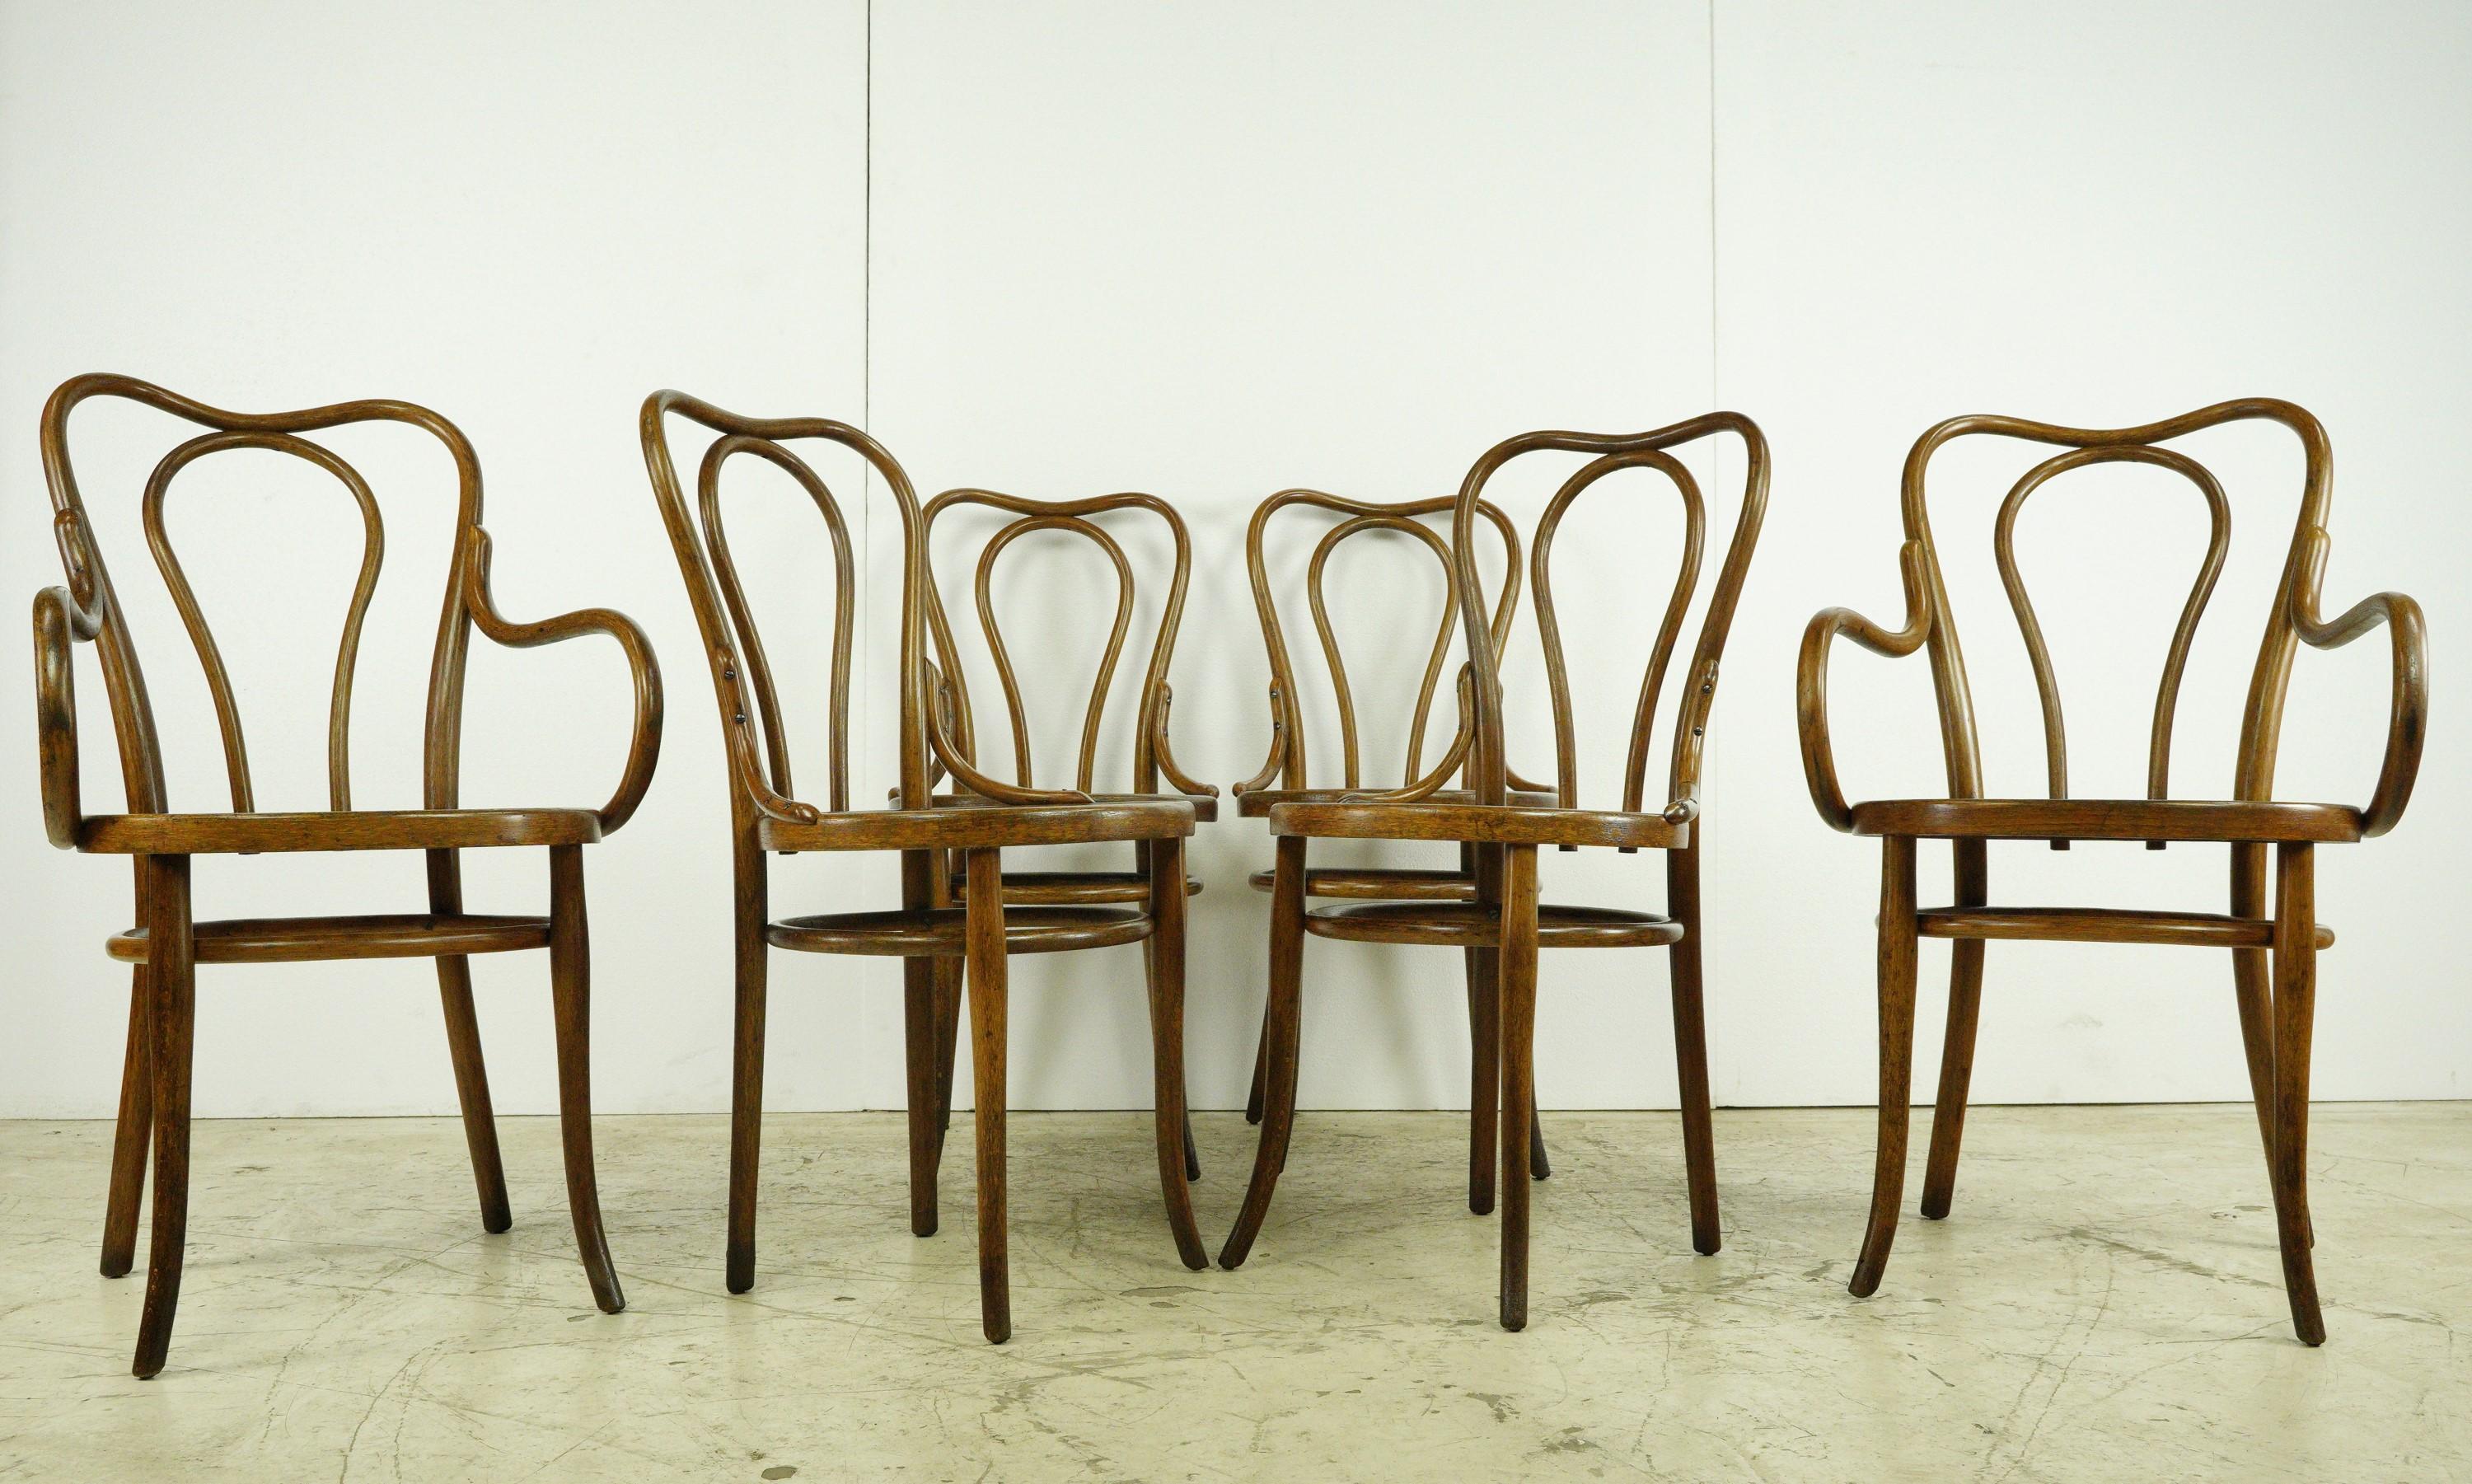 Four of these iconic chairs share a classic design, while the two end chairs feature arms. All feature a matching raised pattern. Please see photos. Despite their age, the set remains in good condition, showcasing the enduring craftsmanship of